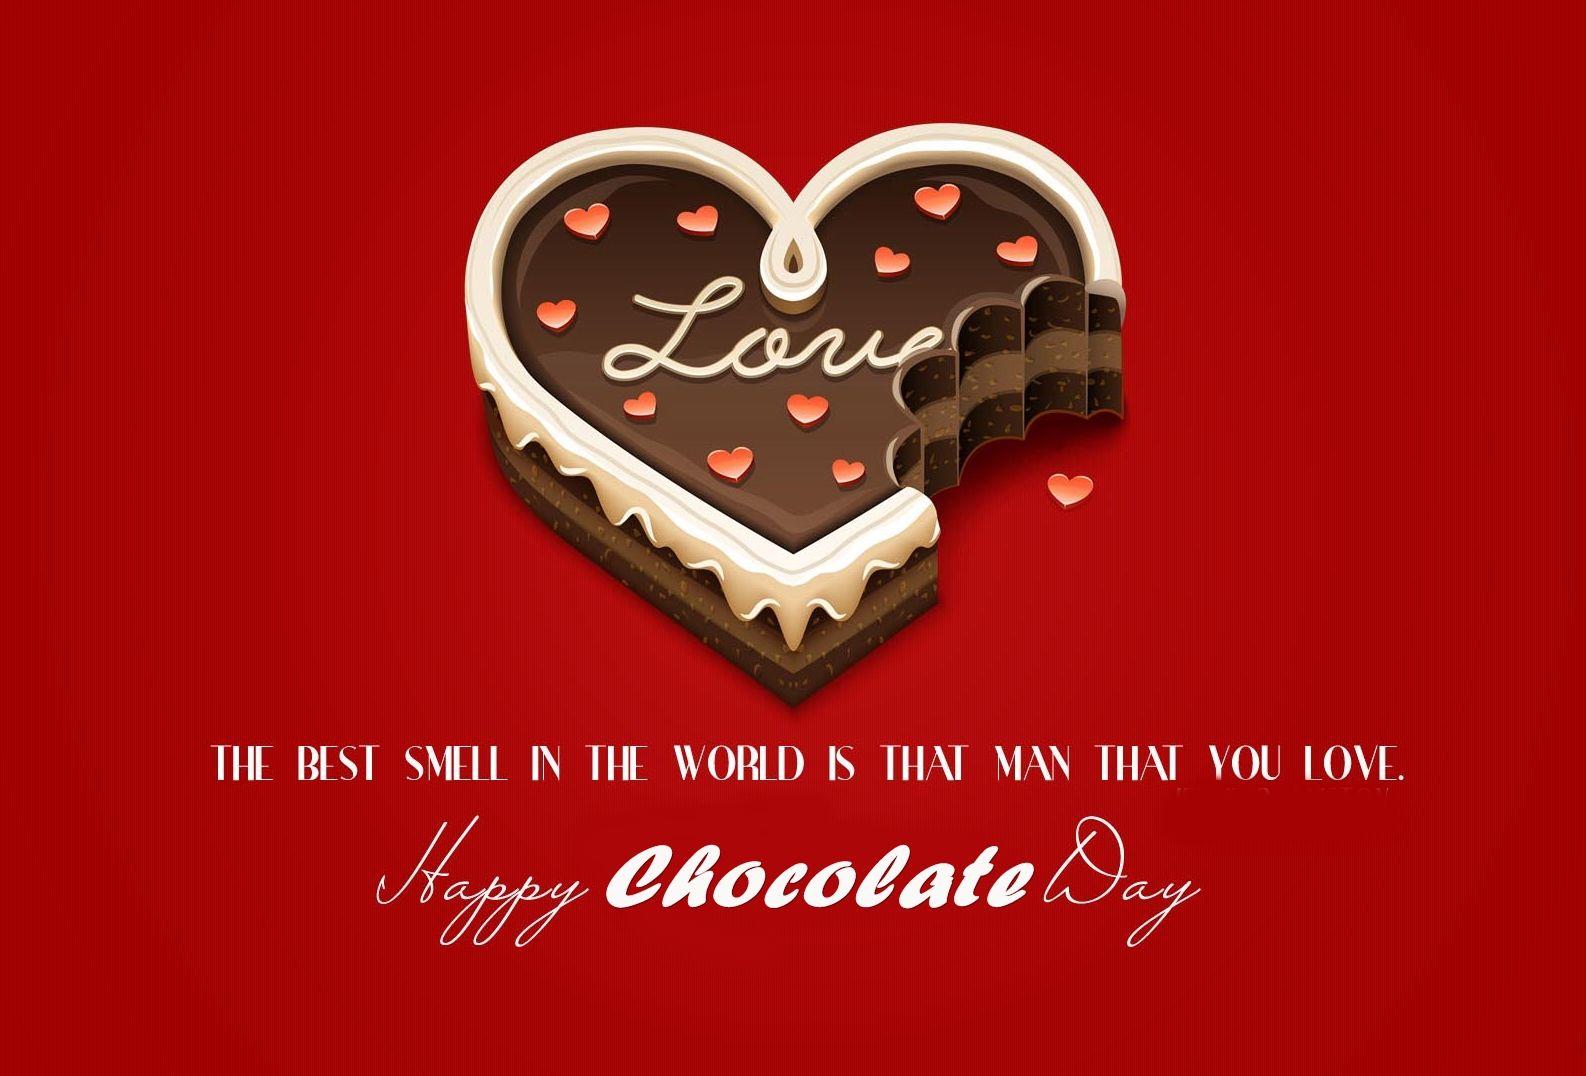 Happy Chocolate Day Image, Wallpapers, HD Photos, Pictures, Pics